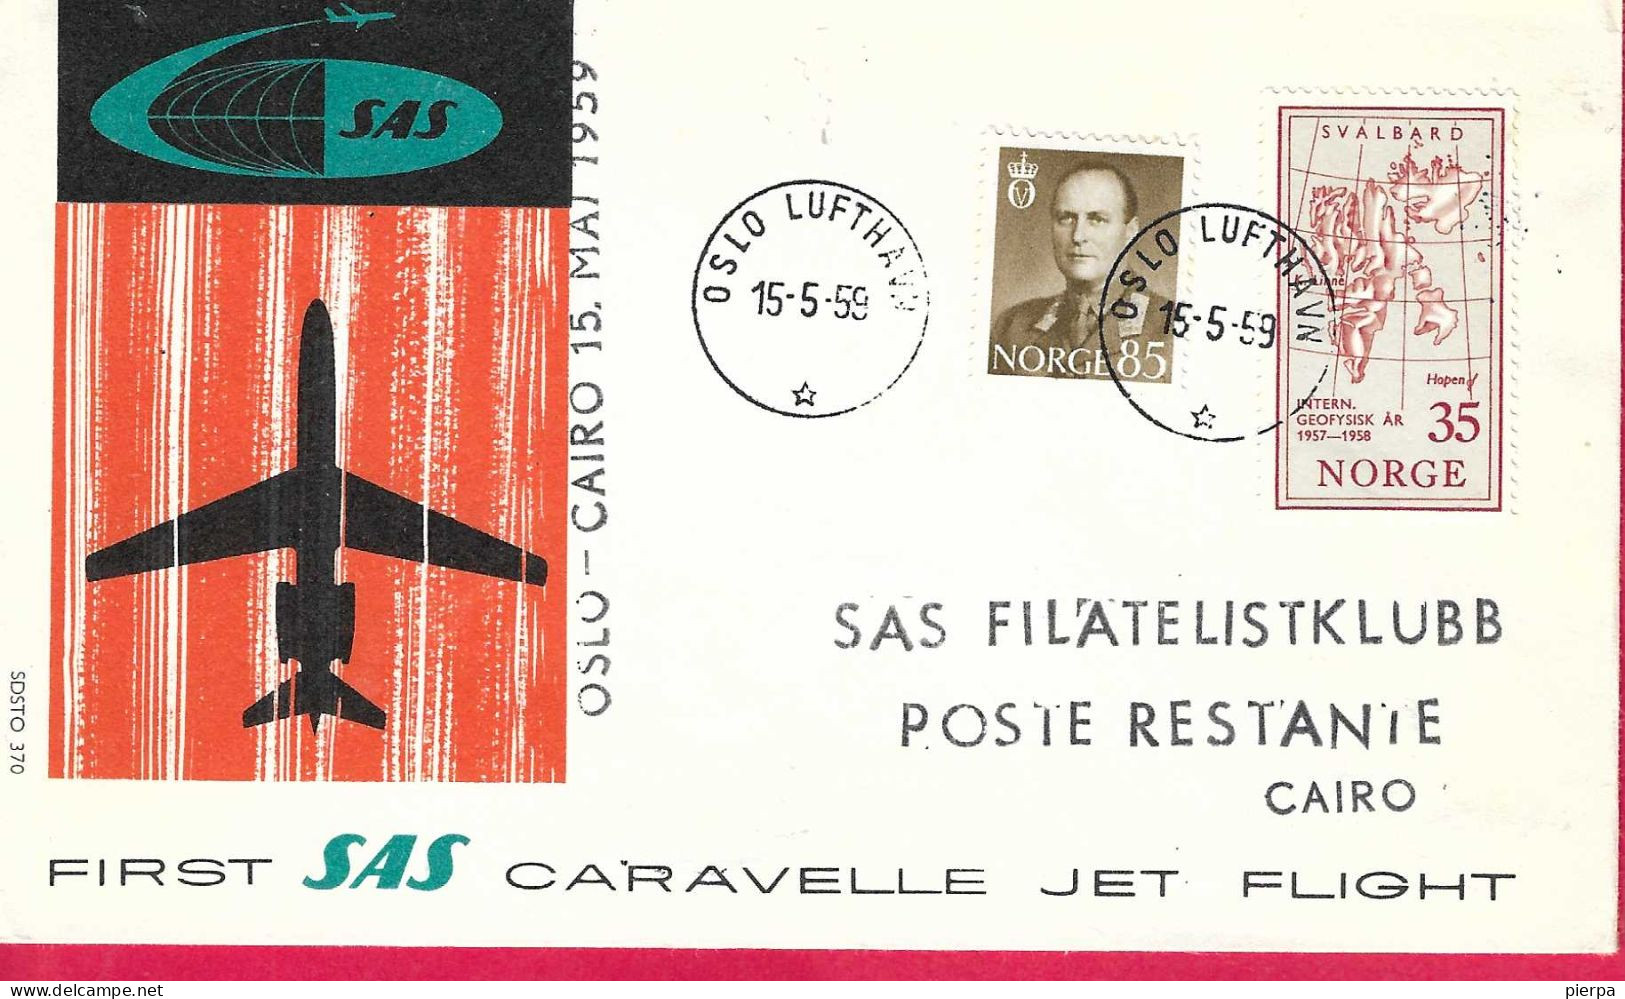 NORGE - FIRST SAS CARAVELLE FLIGHT - FROM OSLO TO CAIRO *15.5.59* ON OFFICIAL COVER - Covers & Documents